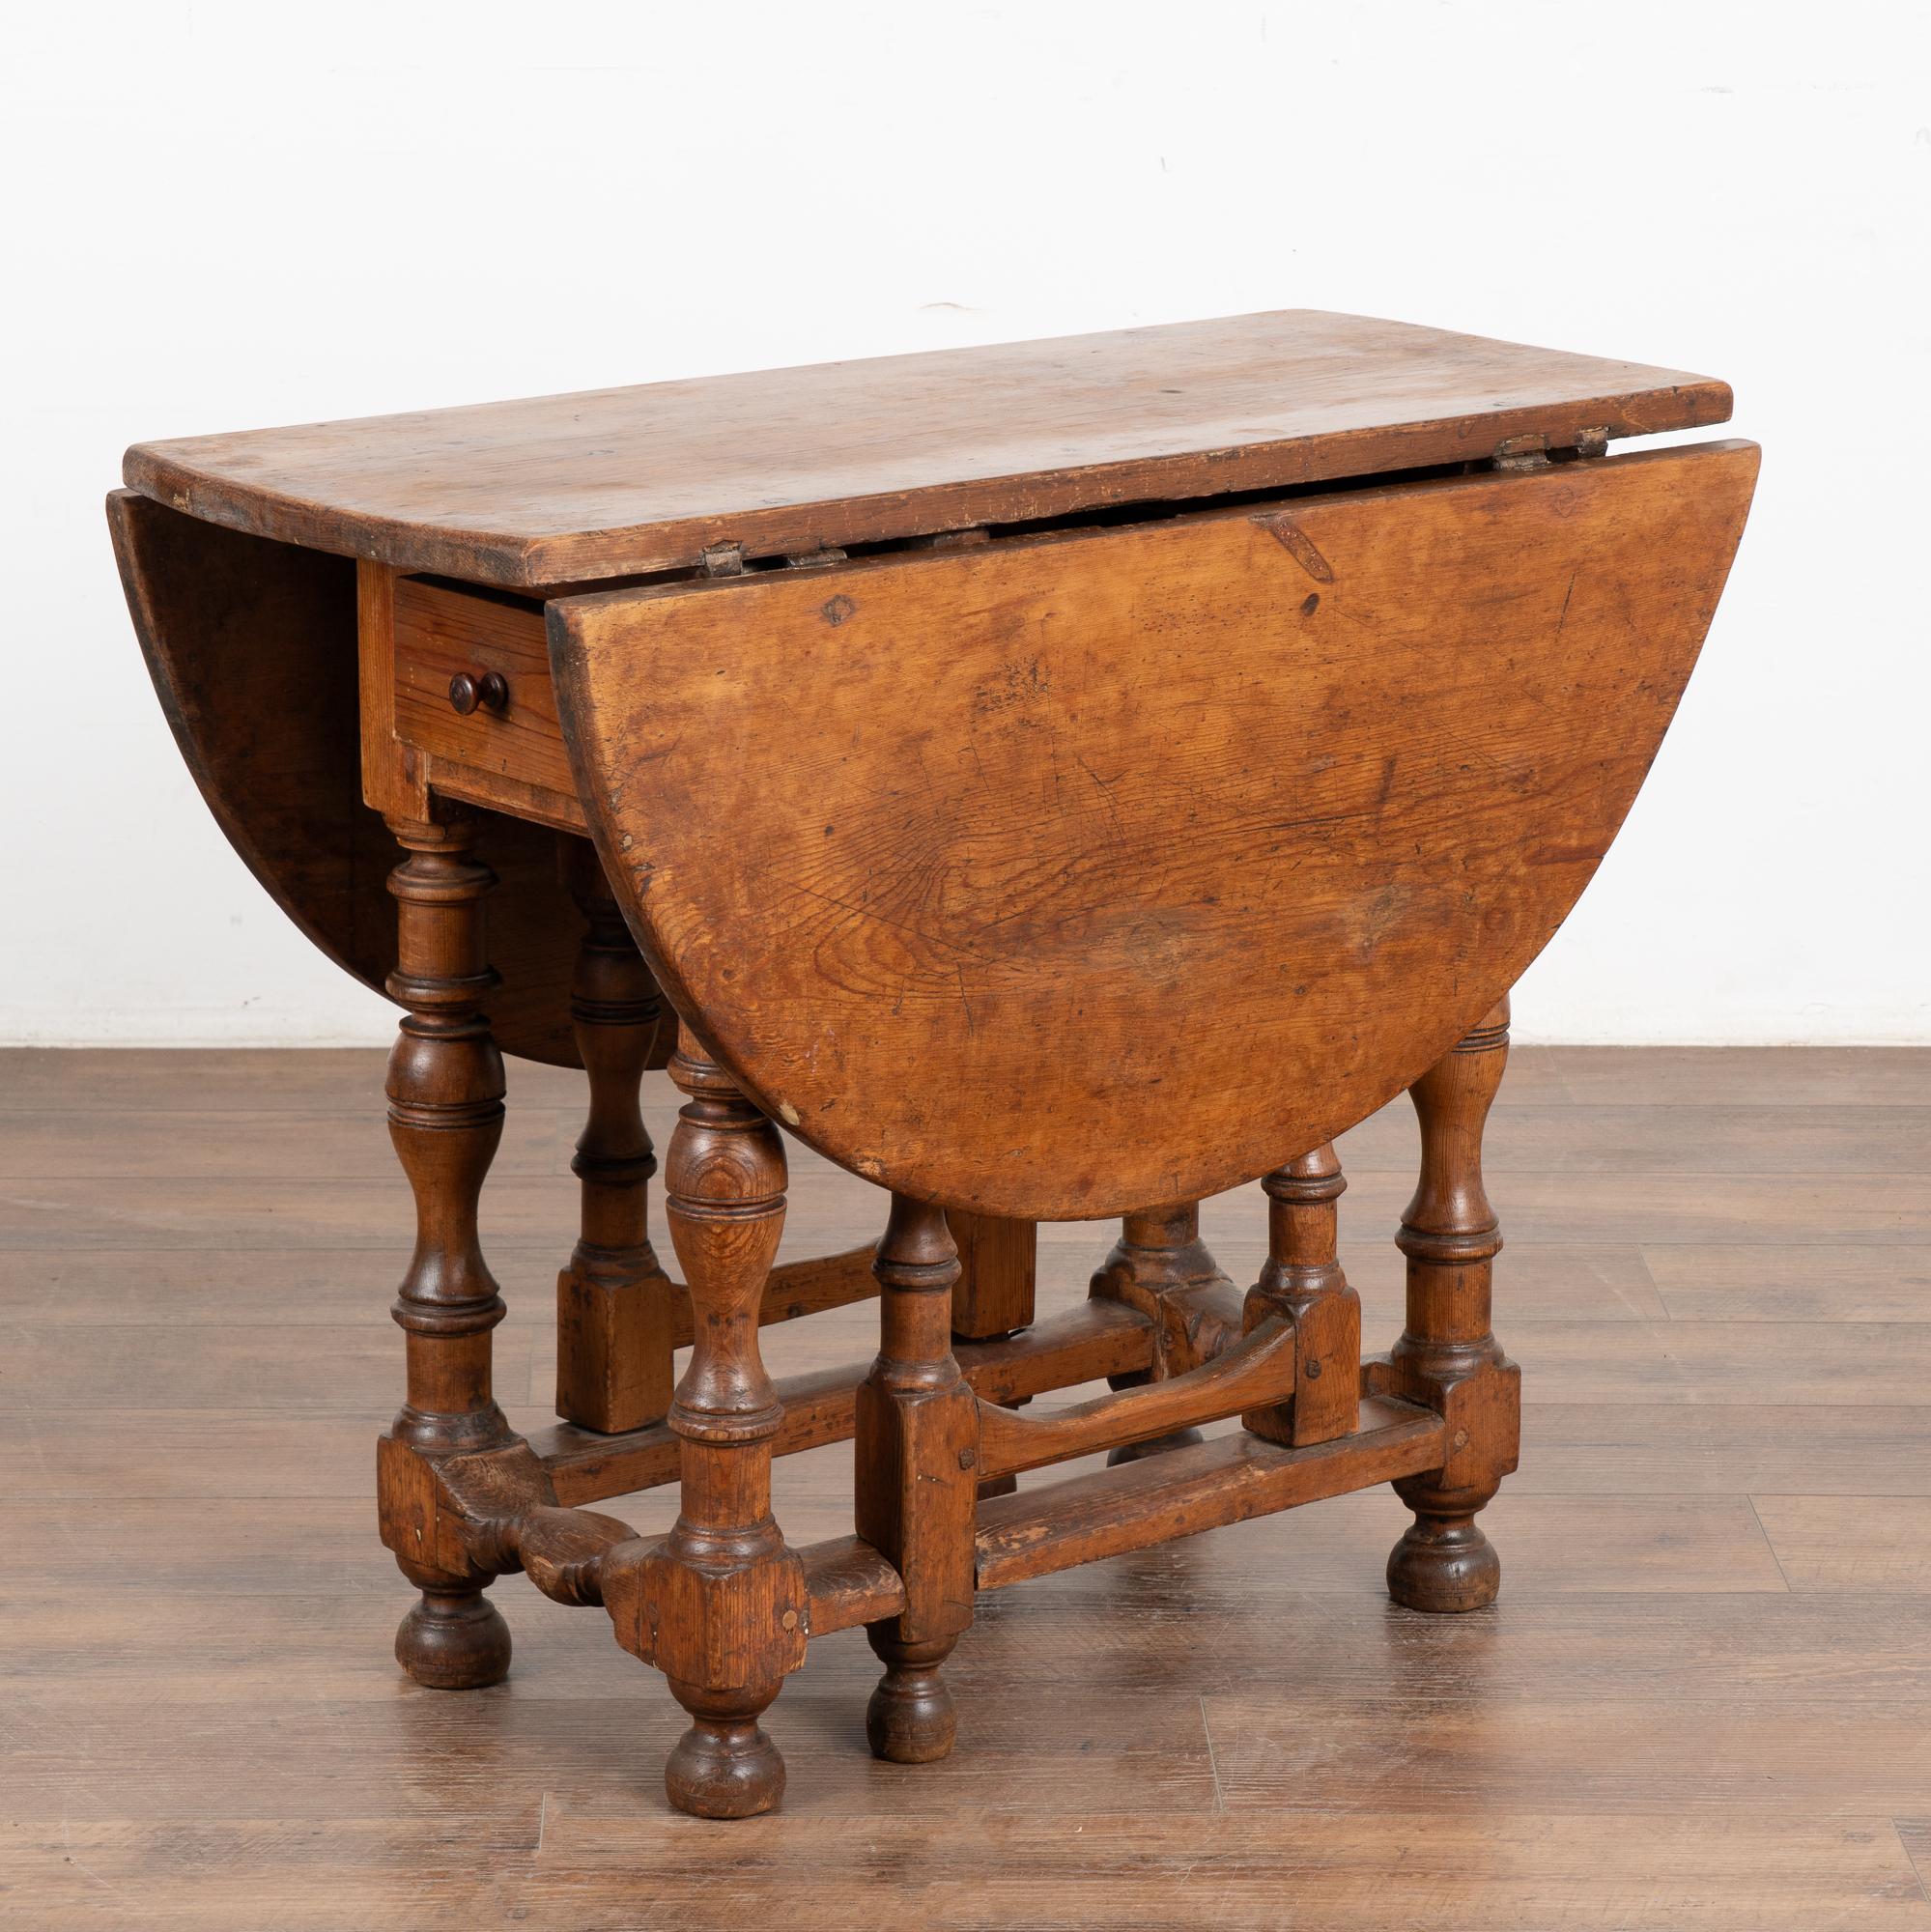 There is wonderful aged charisma to this drop leaf gate leg table that can serve as a side table, small console or even kitchen table.
Unique to this table is the single long drawer and lovely turned legs. The pine has a very deep, rich patina due